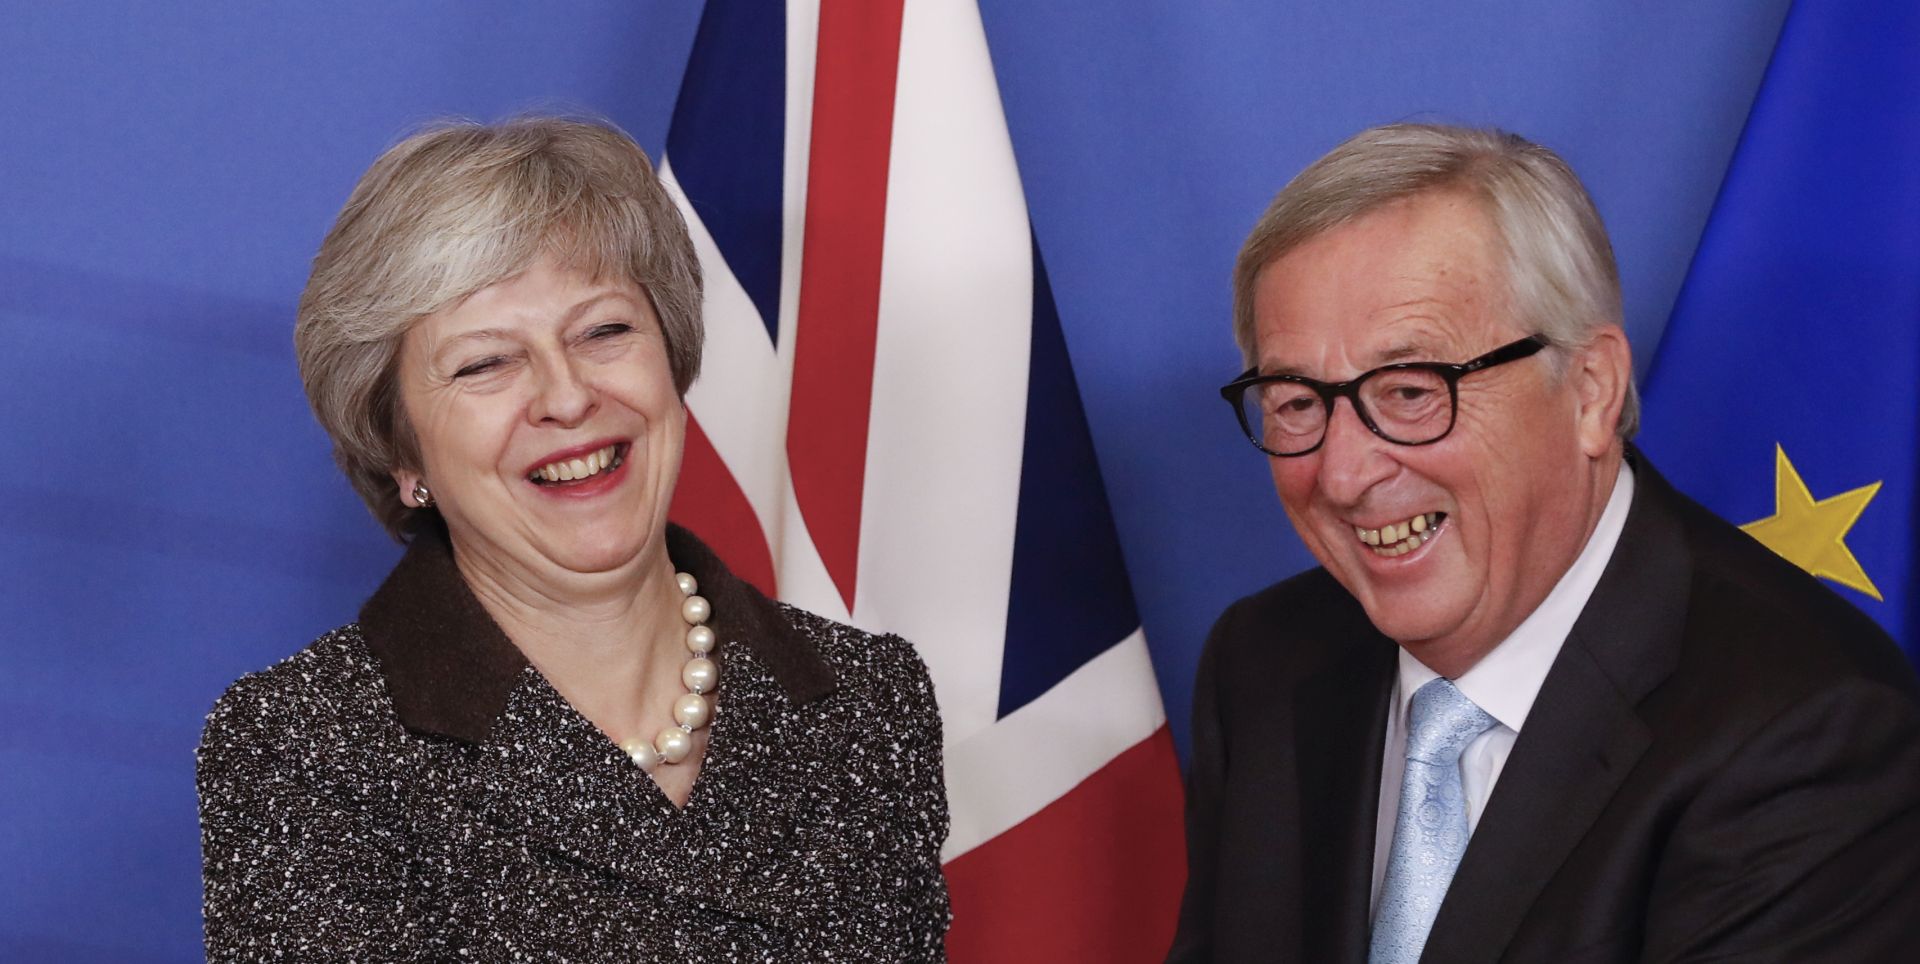 epa07224226 British Prime Minister Theresa May (L) and European commission President Jean-Claude Juncker (R) prior to a meeting in Brussels, Belgium, 11 December 2018. British Prime Minister Theresa May postponed the Brexit deal Meaningful Vote, on 11 December 2018 due to risk of rejection from Members of Parliament. Theresa May is currently on a whistle stop tour of Europe calling on the leaders of the Netherlands, Germany and EU in Brussels looking for new guidelines for her Northern Ireland backstop.  EPA/OLIVIER HOSLET